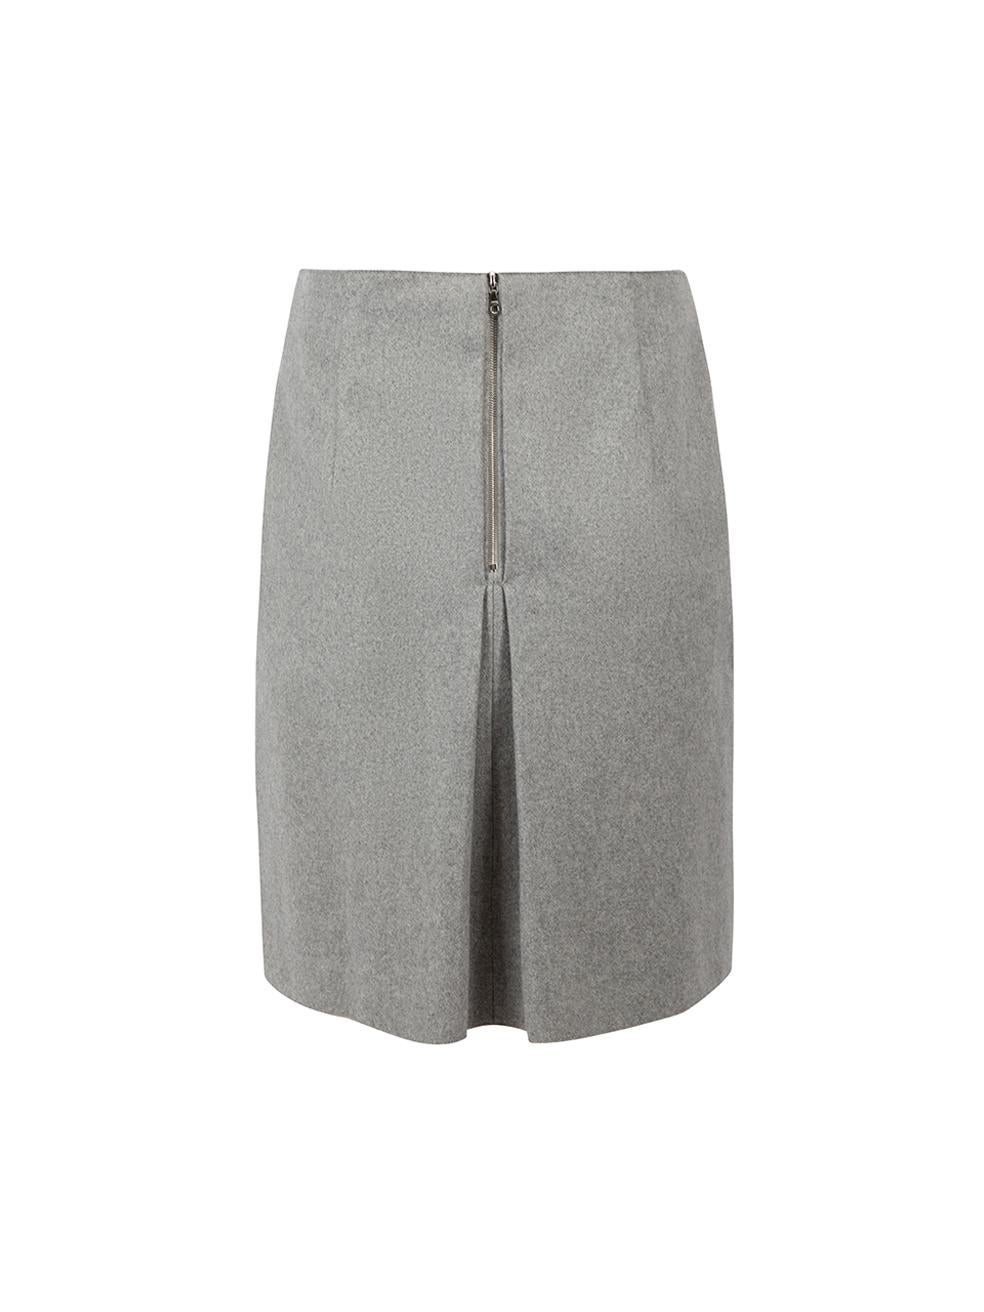 Acne Studios Grey Wool Mini Pencil Skirt Size XS In Good Condition In London, GB